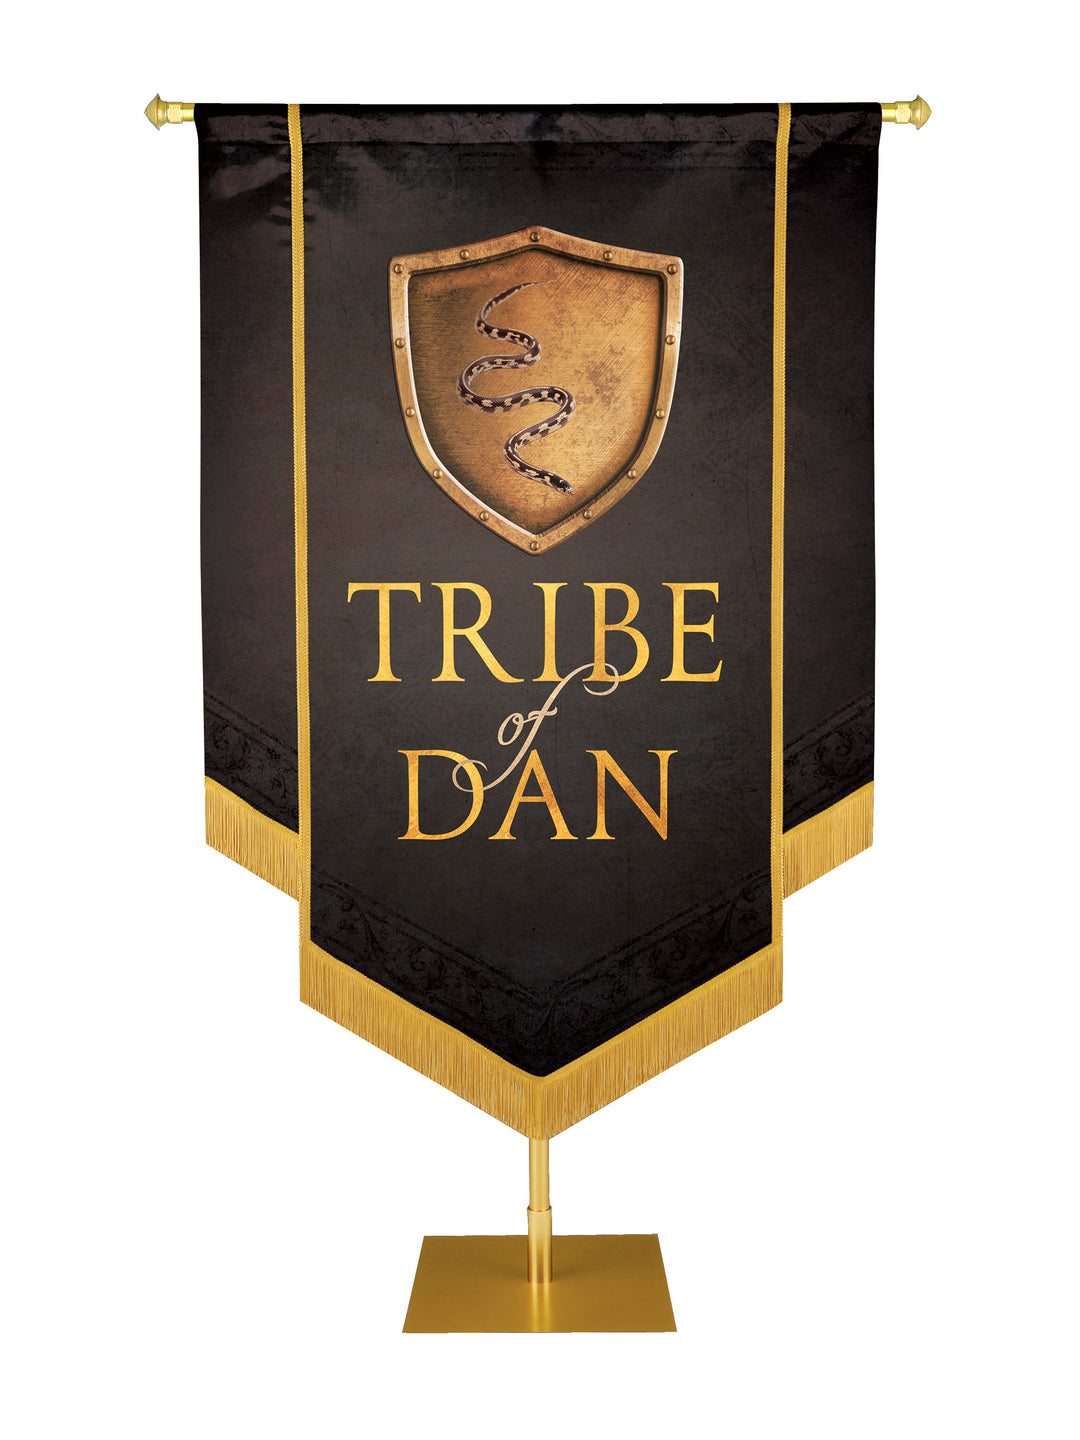 Tribe of Dan Embellished Banner - Handcrafted Banners - PraiseBanners